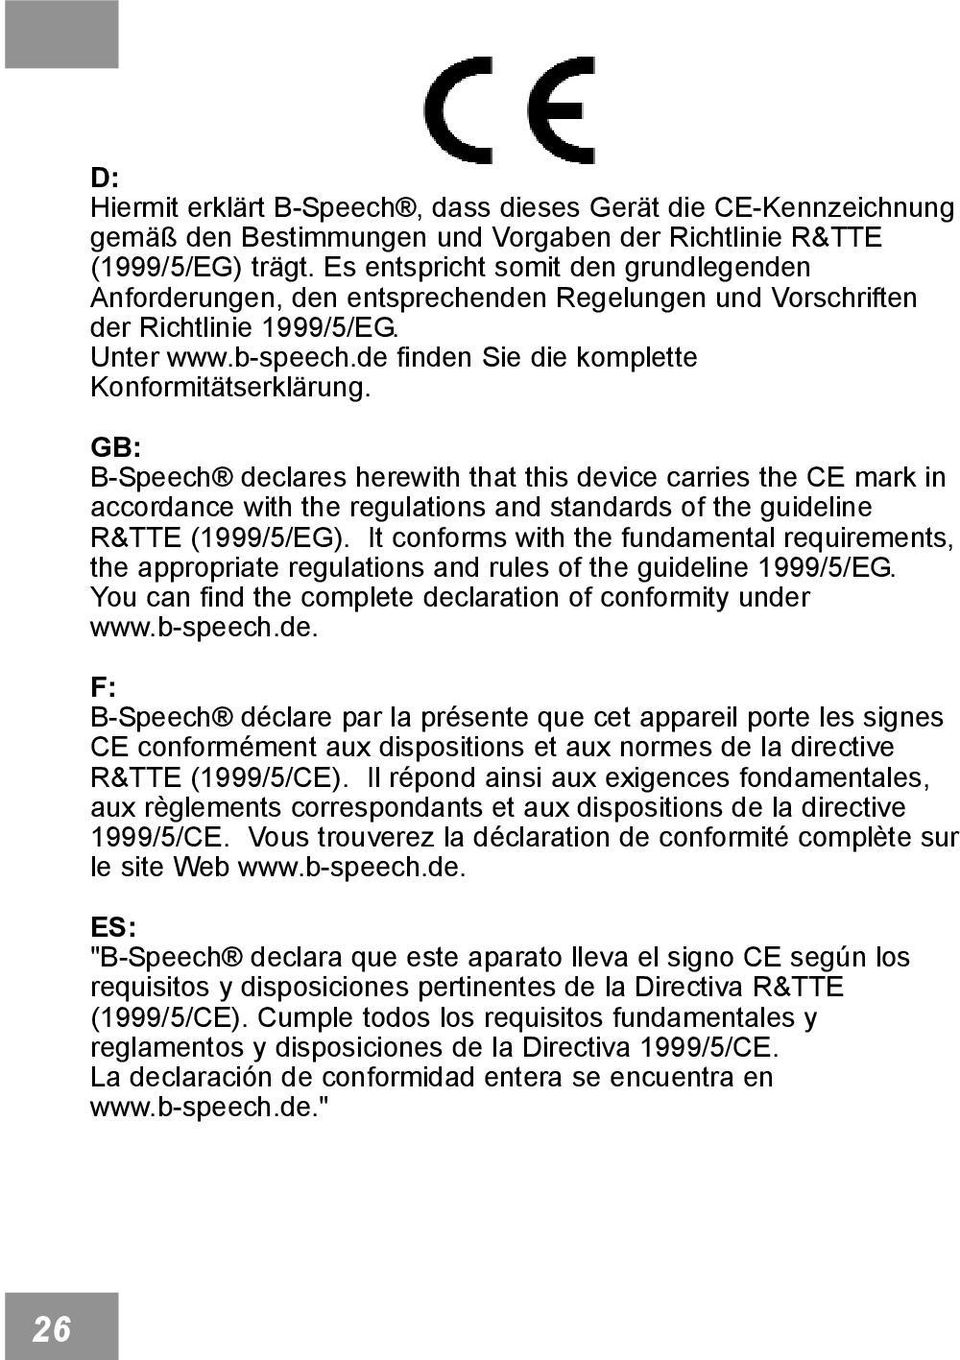 GB: B-Speech declares herewith that this device carries the CE mark in accordance with the regulations and standards of the guideline R&TTE (1999/5/EG).